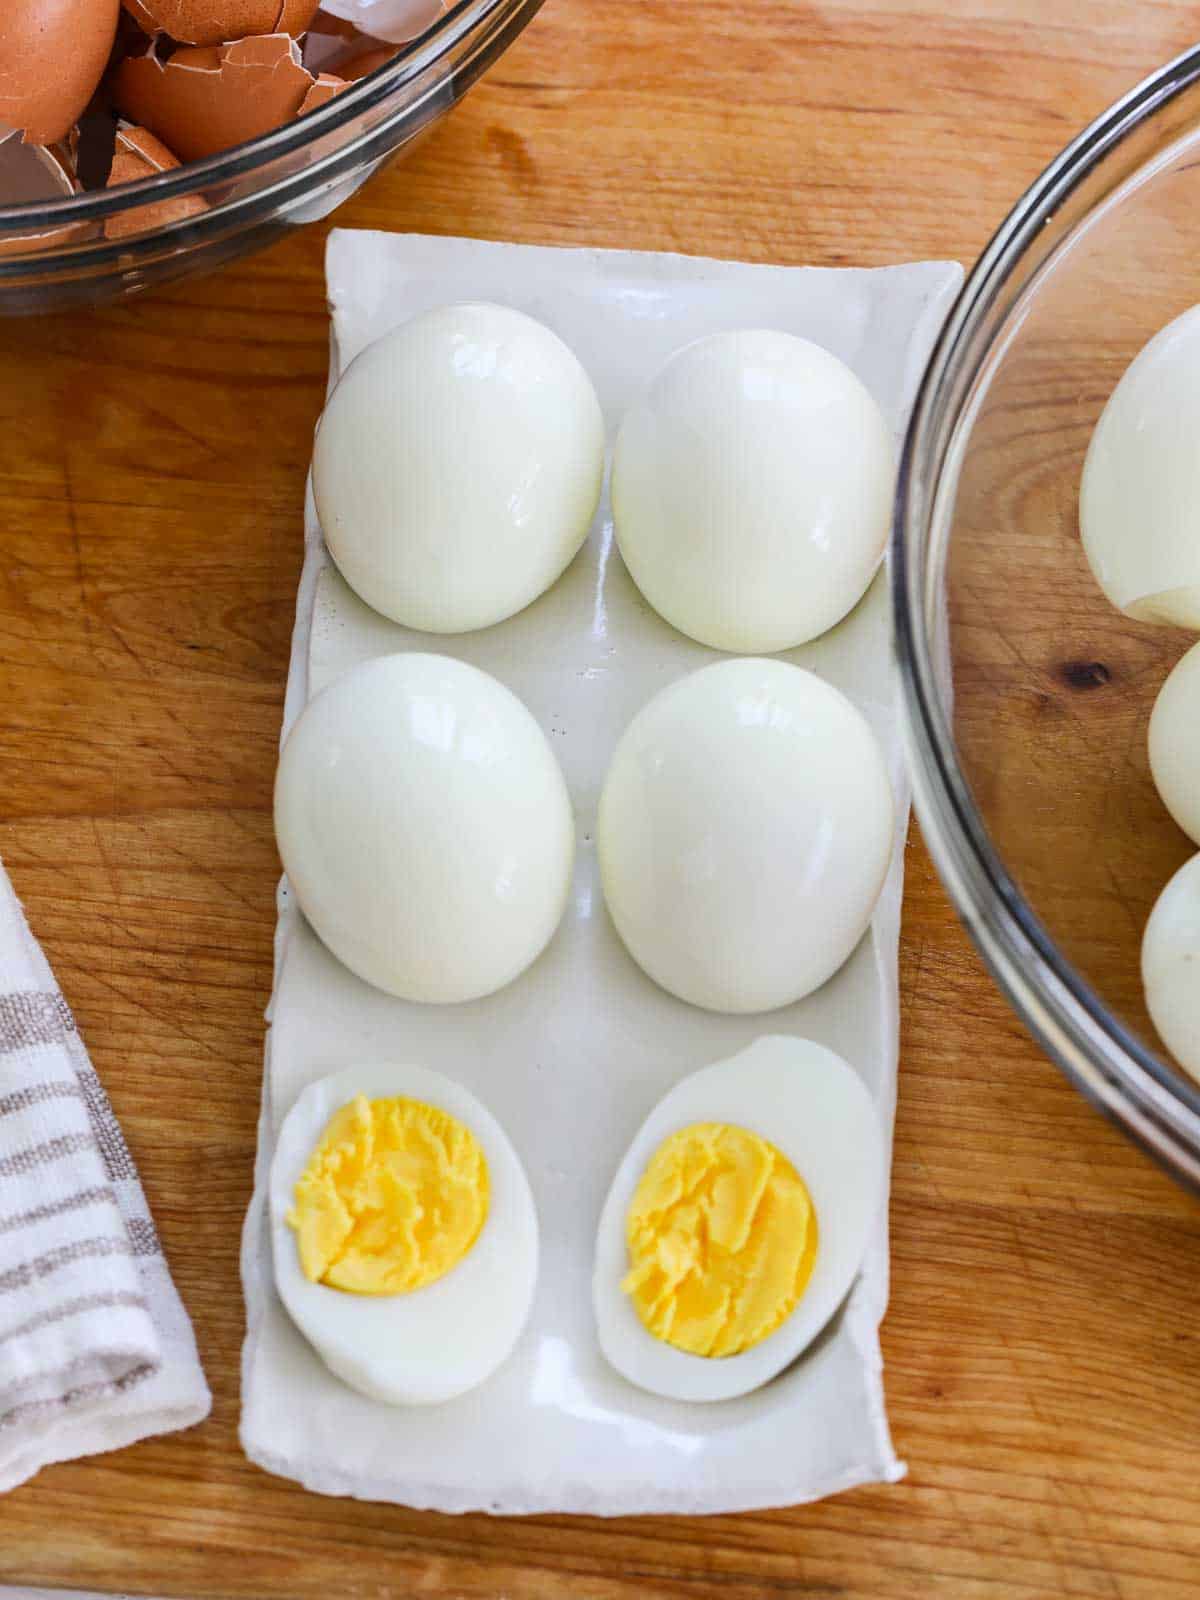 Looking down on a white ceramic egg dish with hard boiled eggs and one sliced open to reveal the yolk